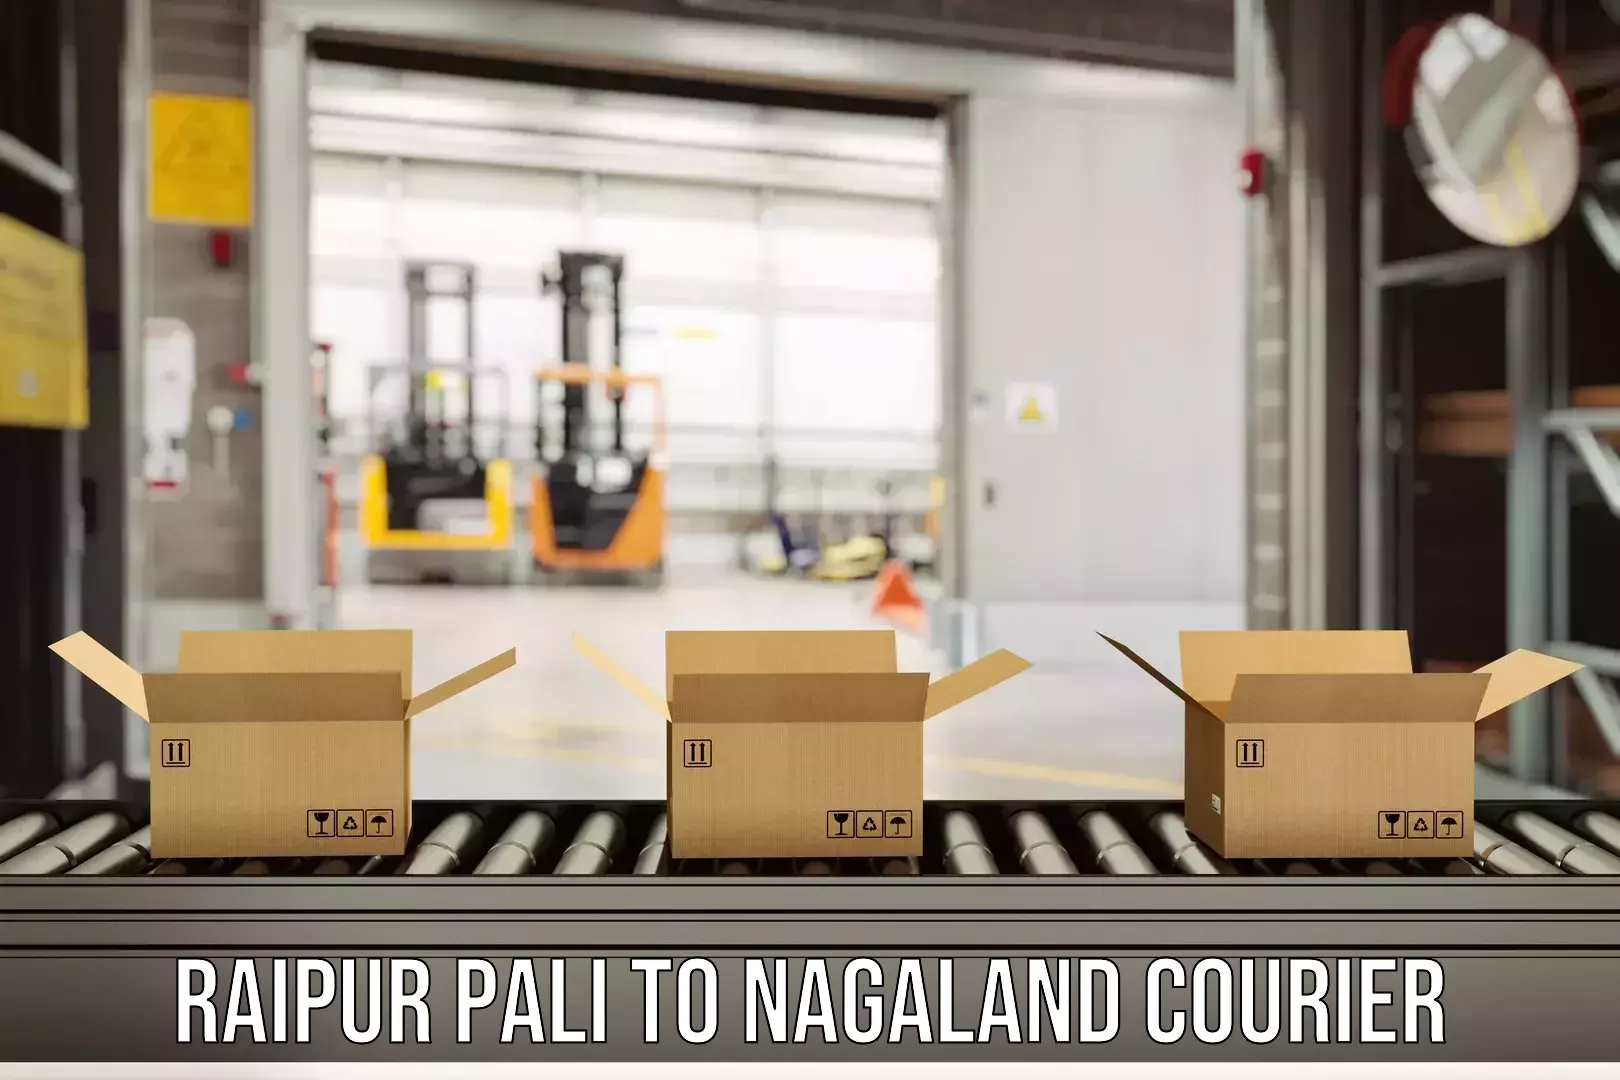 Premium delivery services Raipur Pali to Nagaland